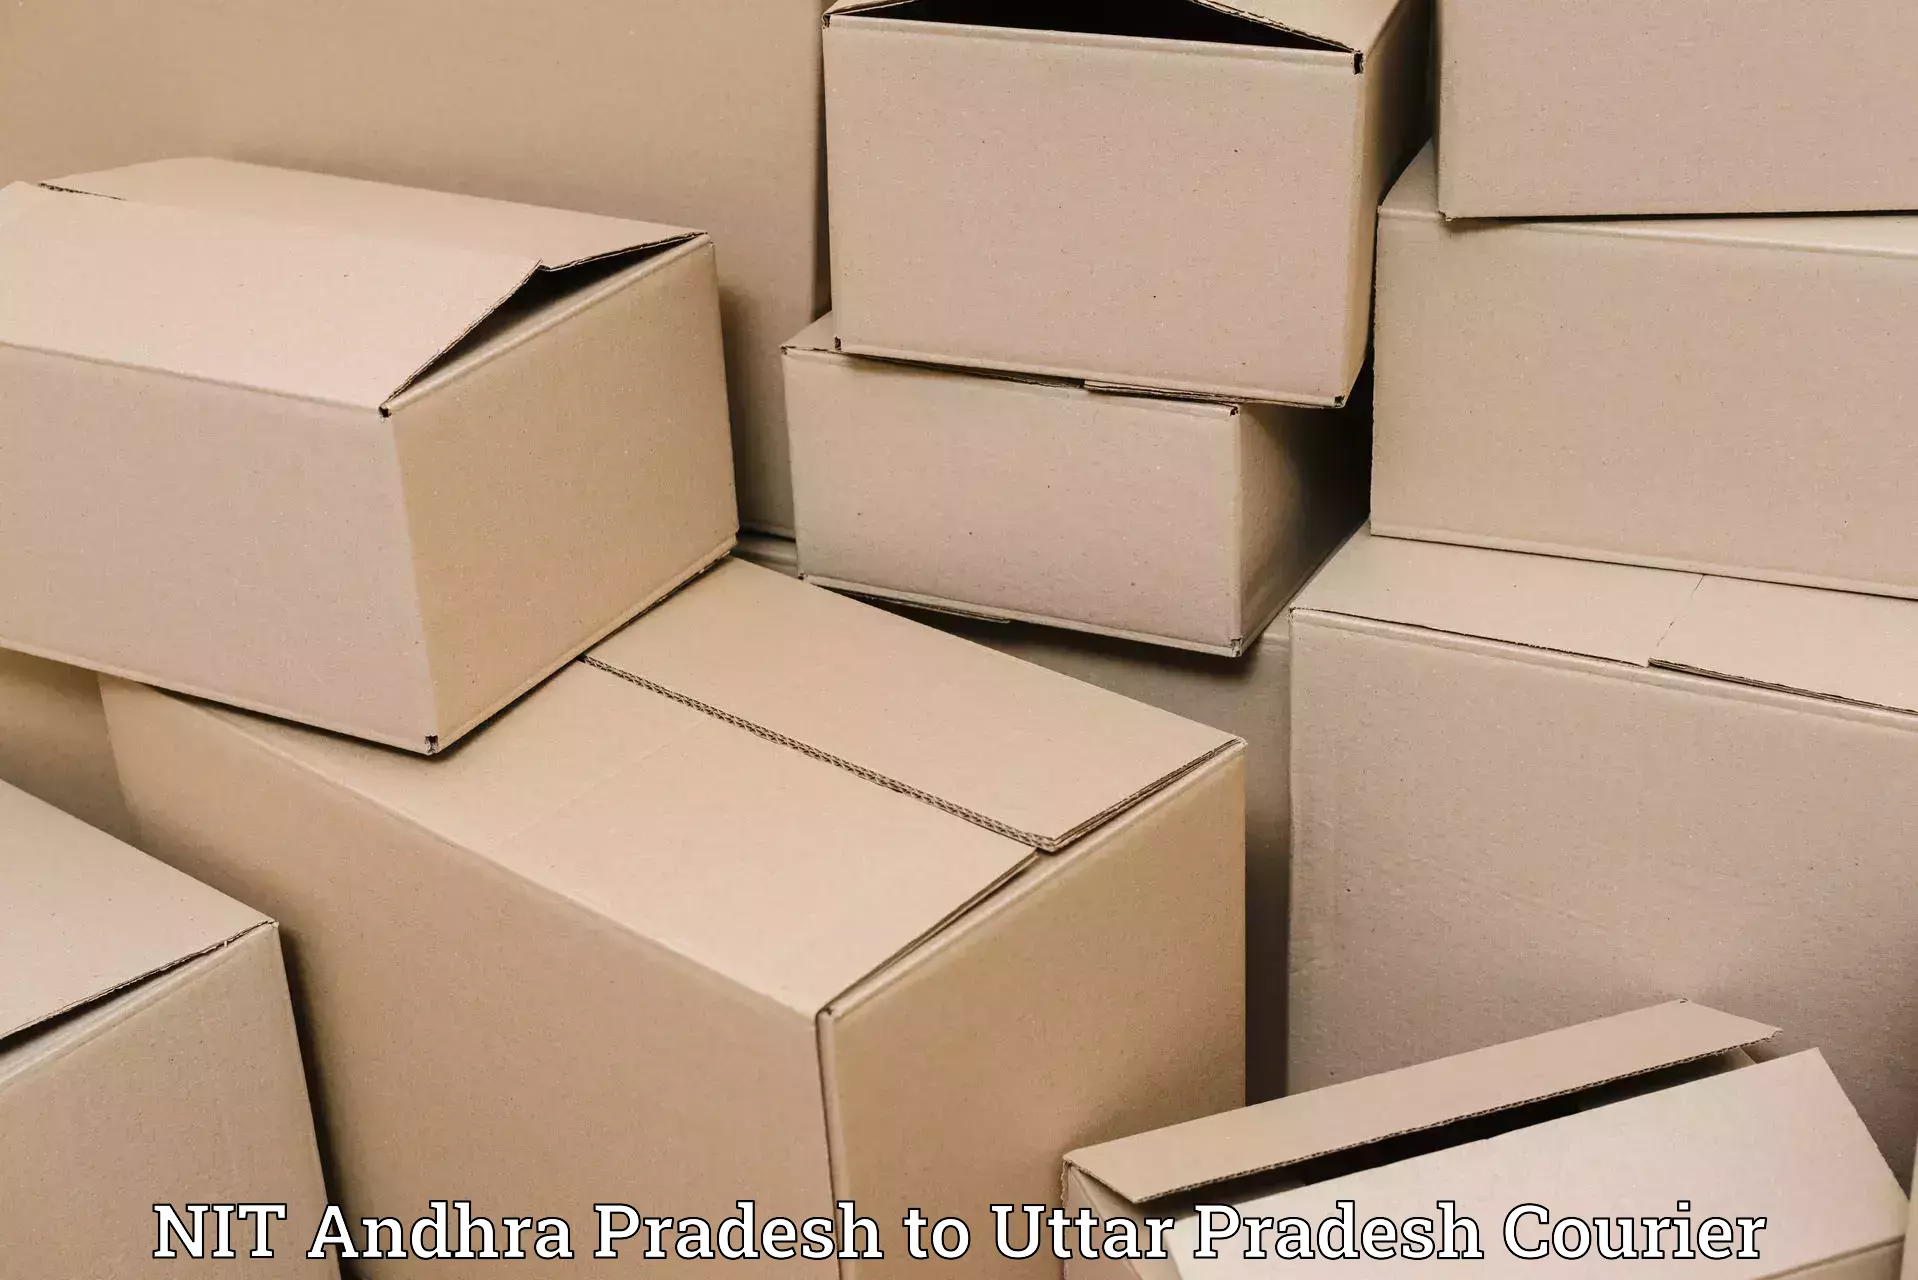 Personal courier services NIT Andhra Pradesh to Siddharthnagar